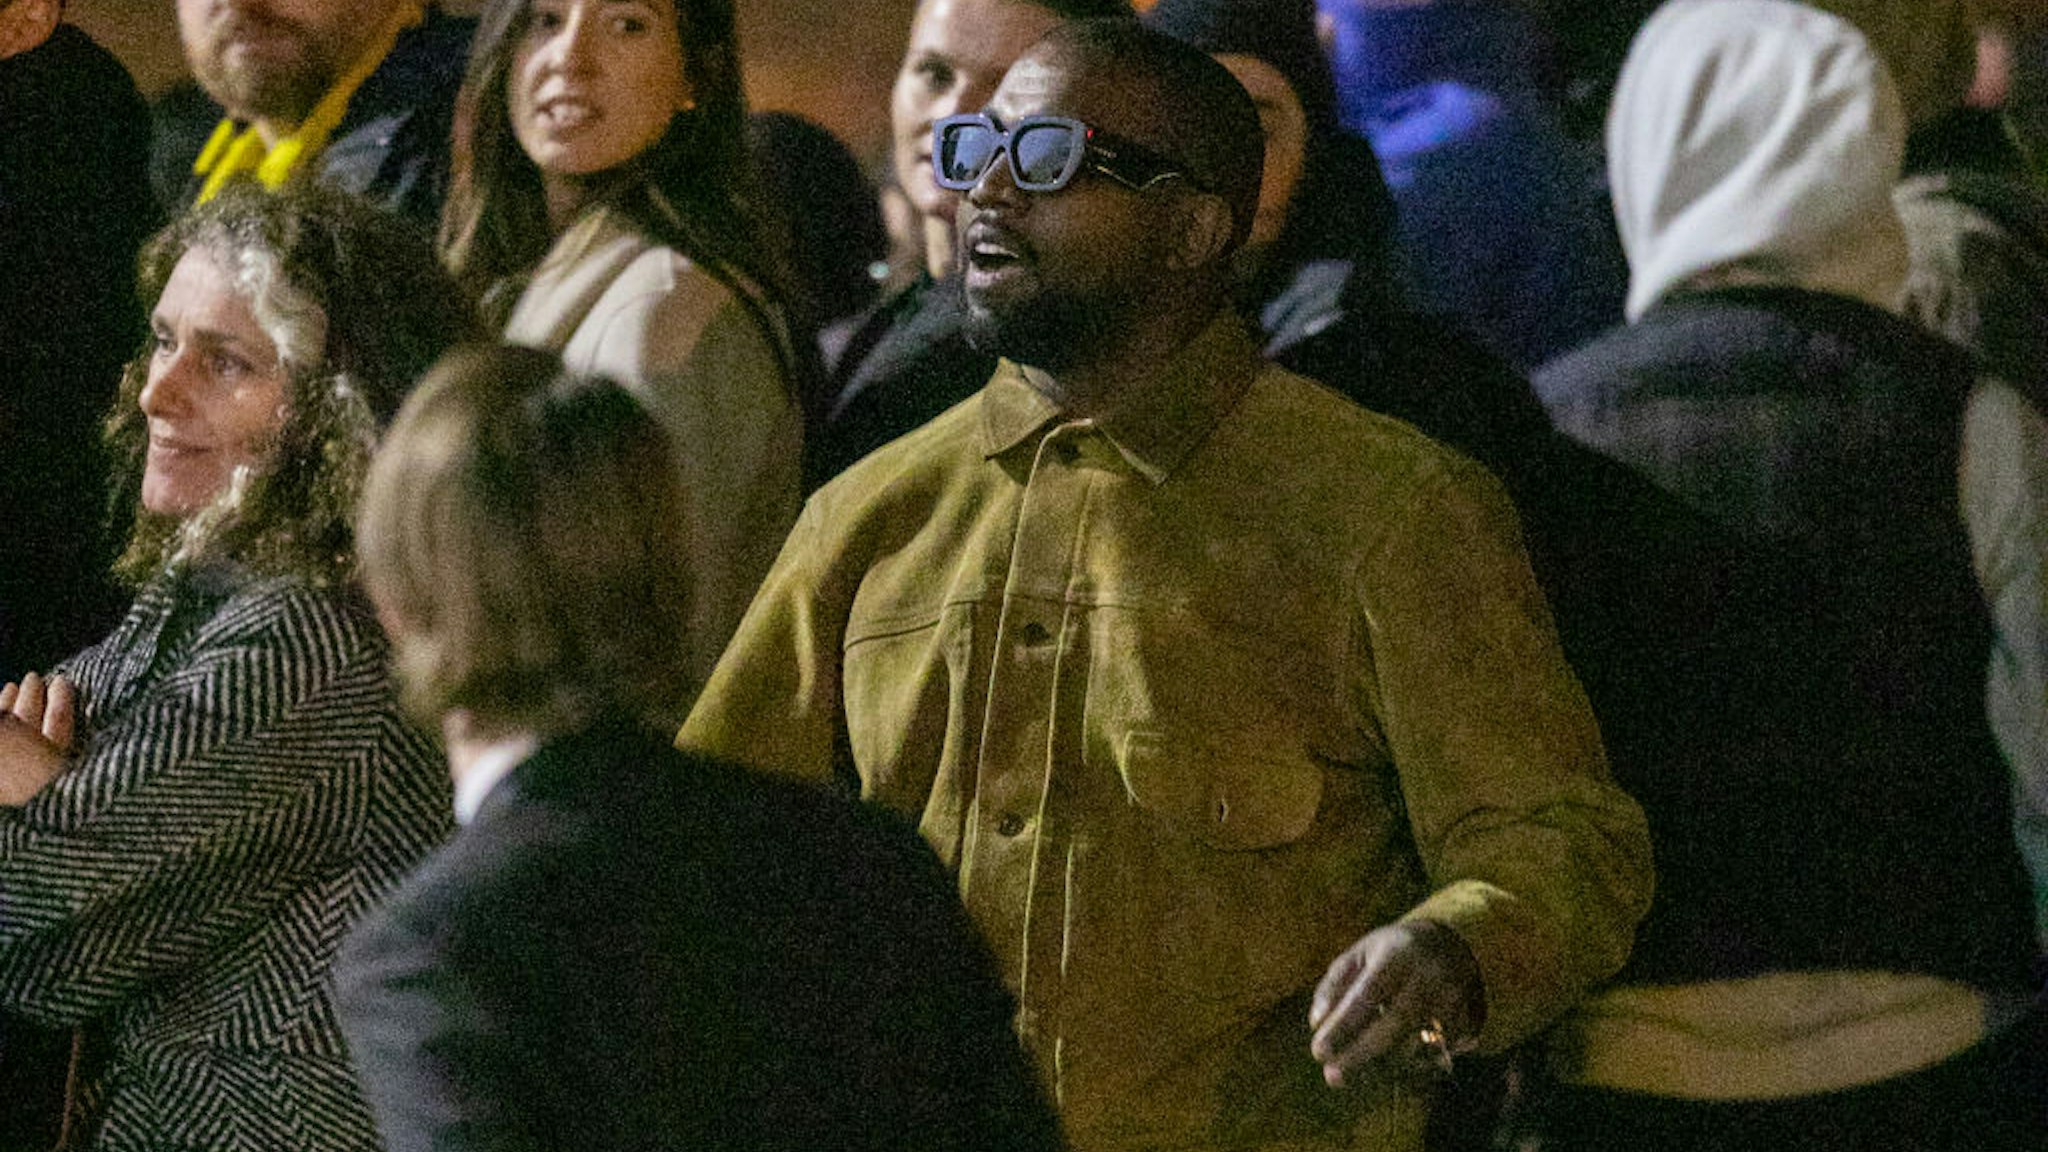 Kanye West attends the "Yeezy Season 8" show as part of the Paris Fashion Week Womenswear Fall/Winter 2020/2021 on March 02, 2020 in Paris, France.